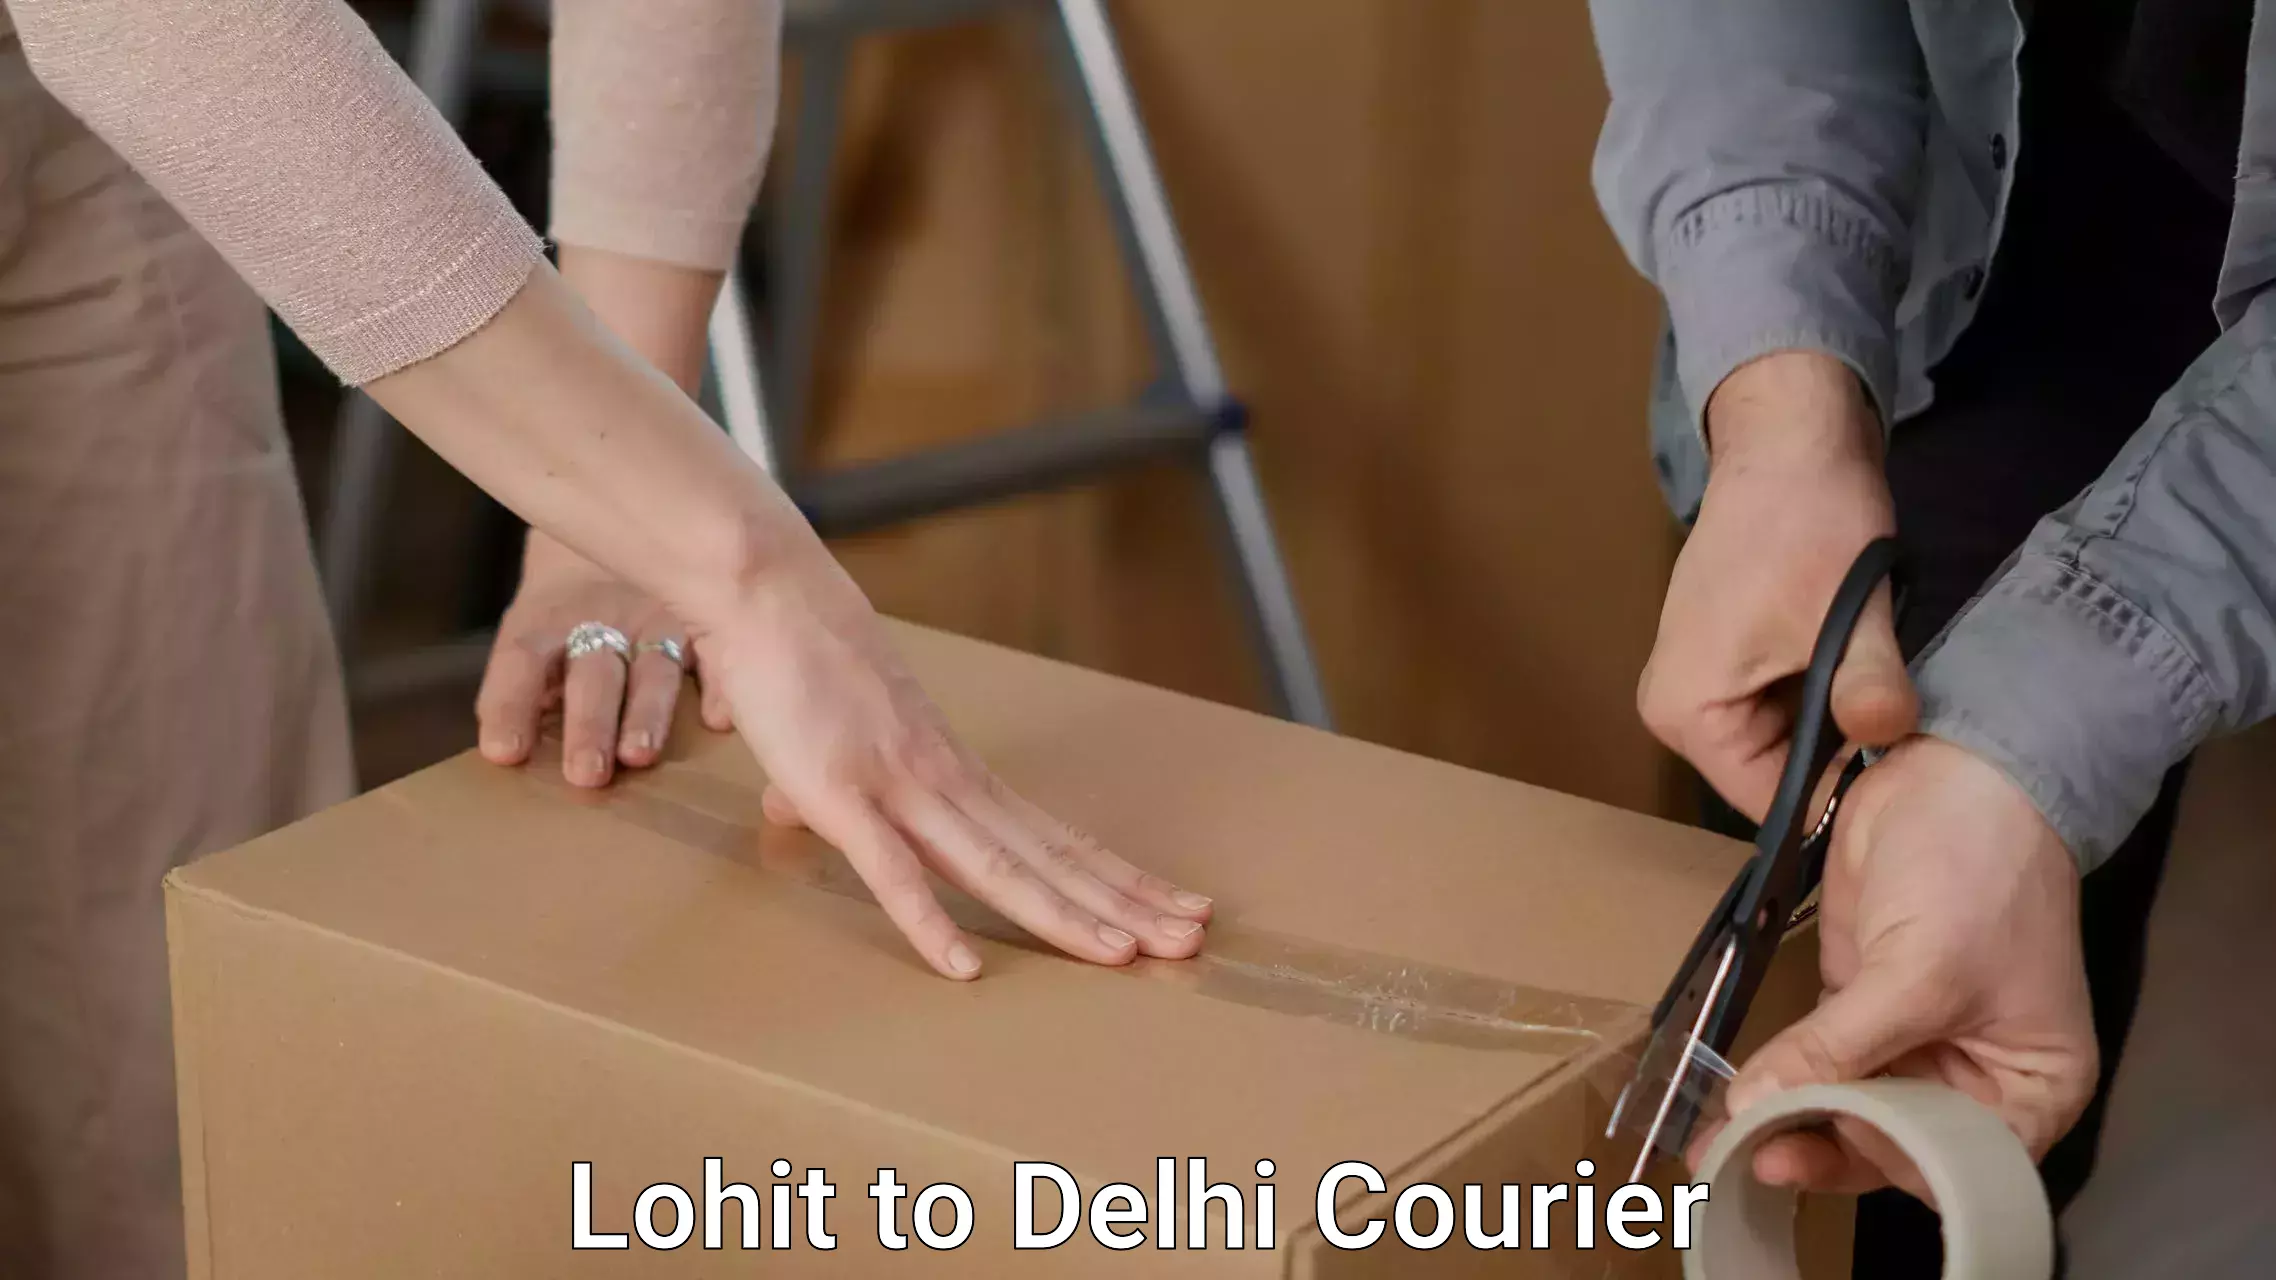 Furniture moving experts Lohit to Lodhi Road